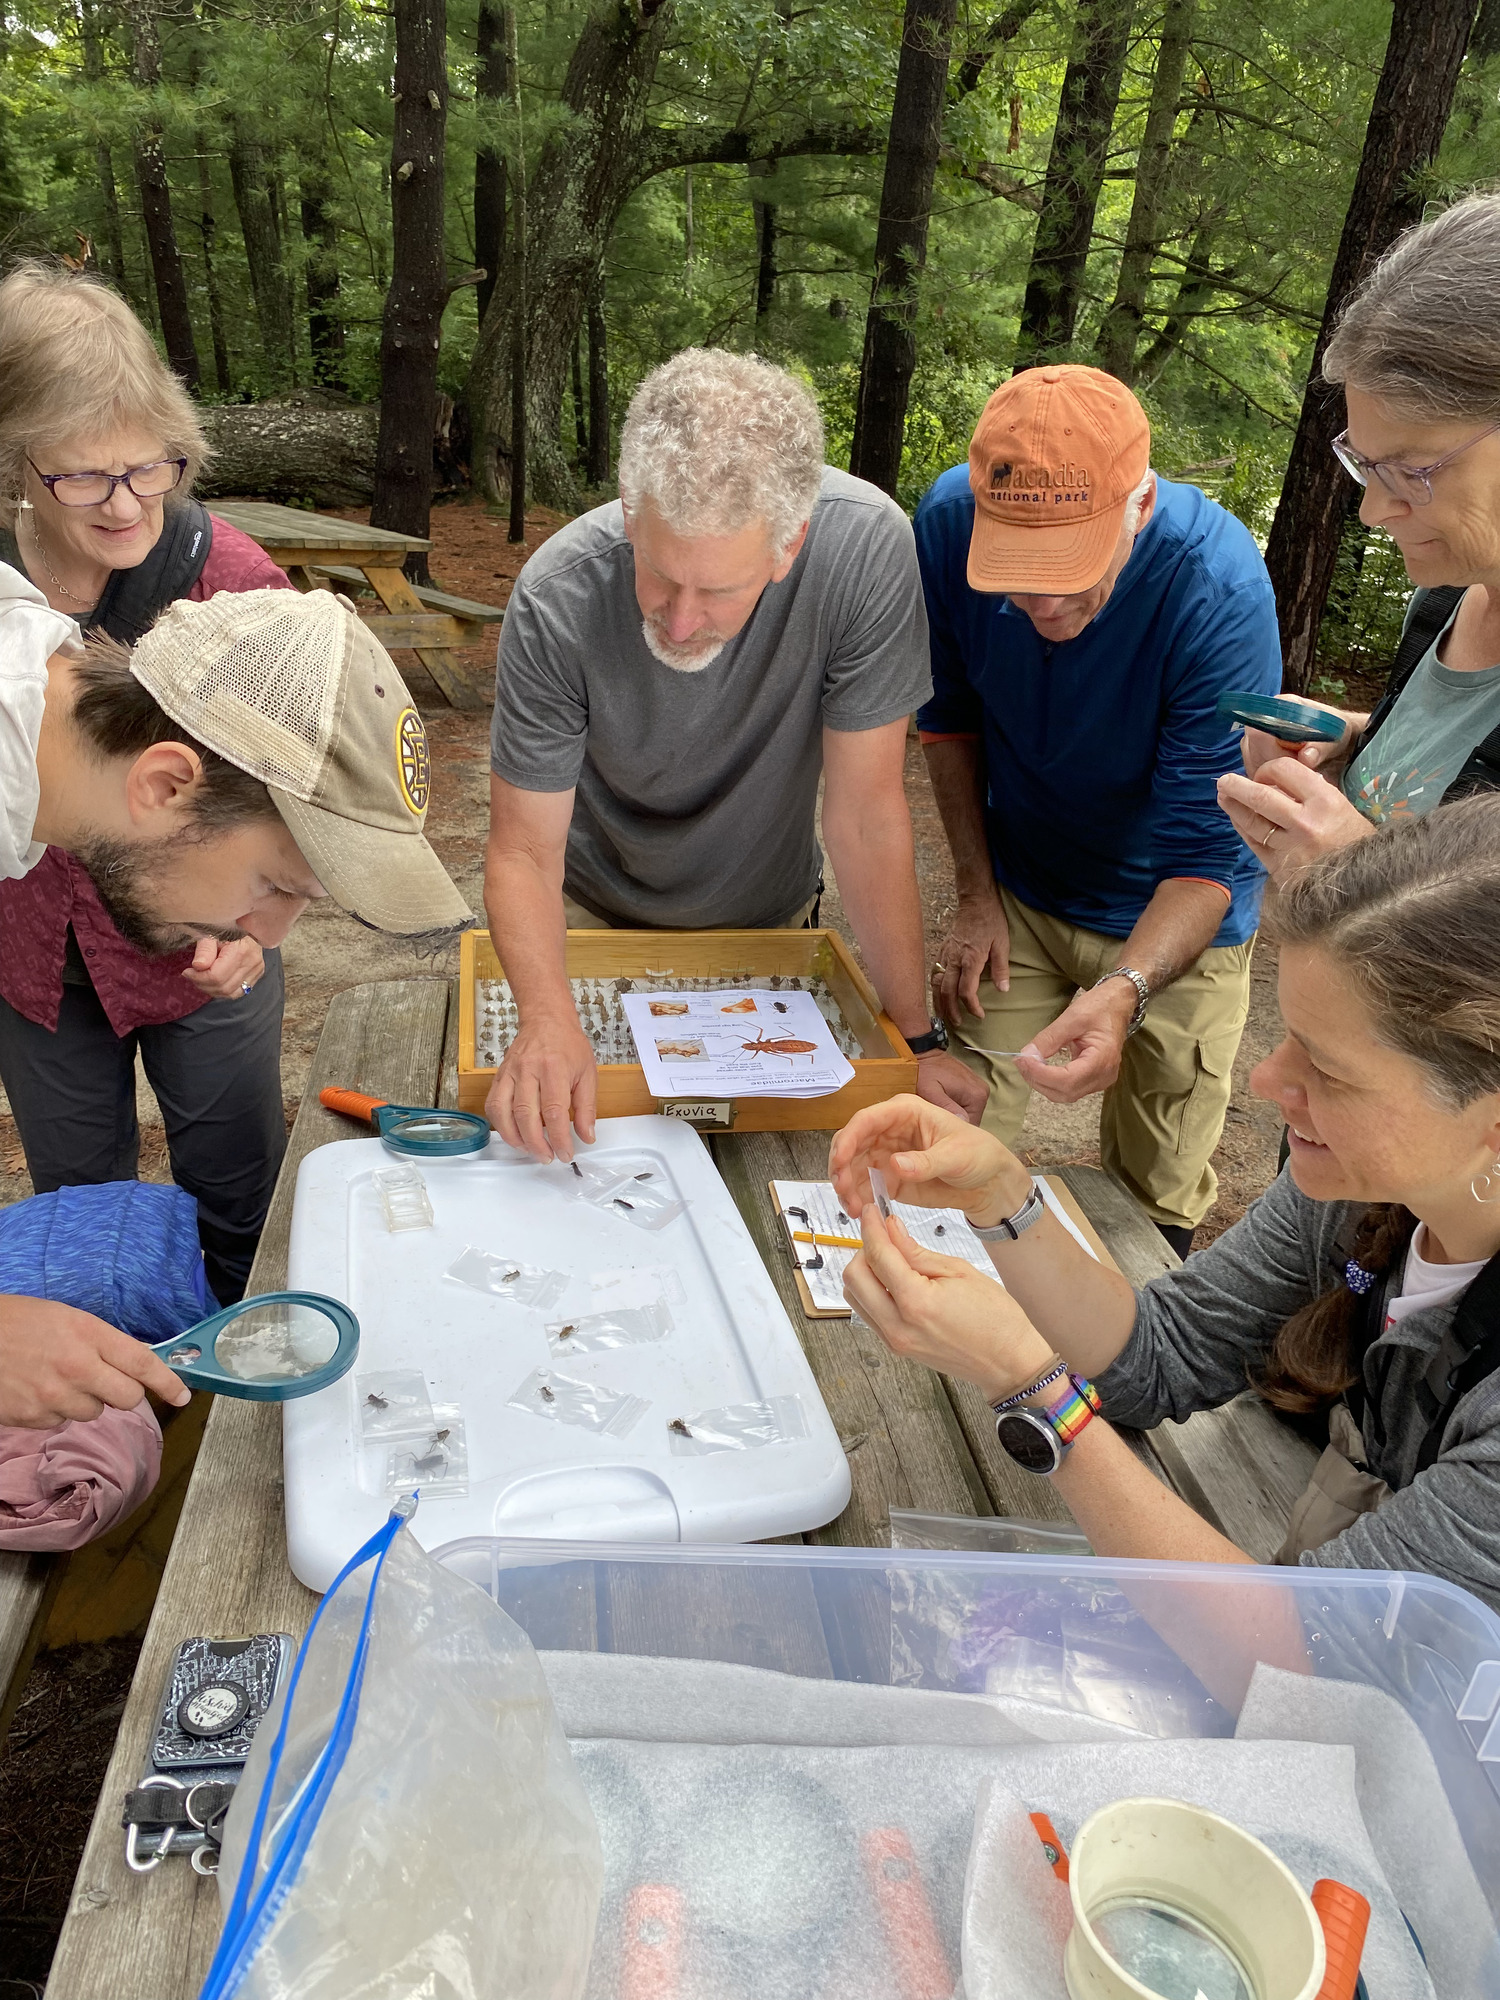 Six people stand around a table and process dragonfly larvae samples.